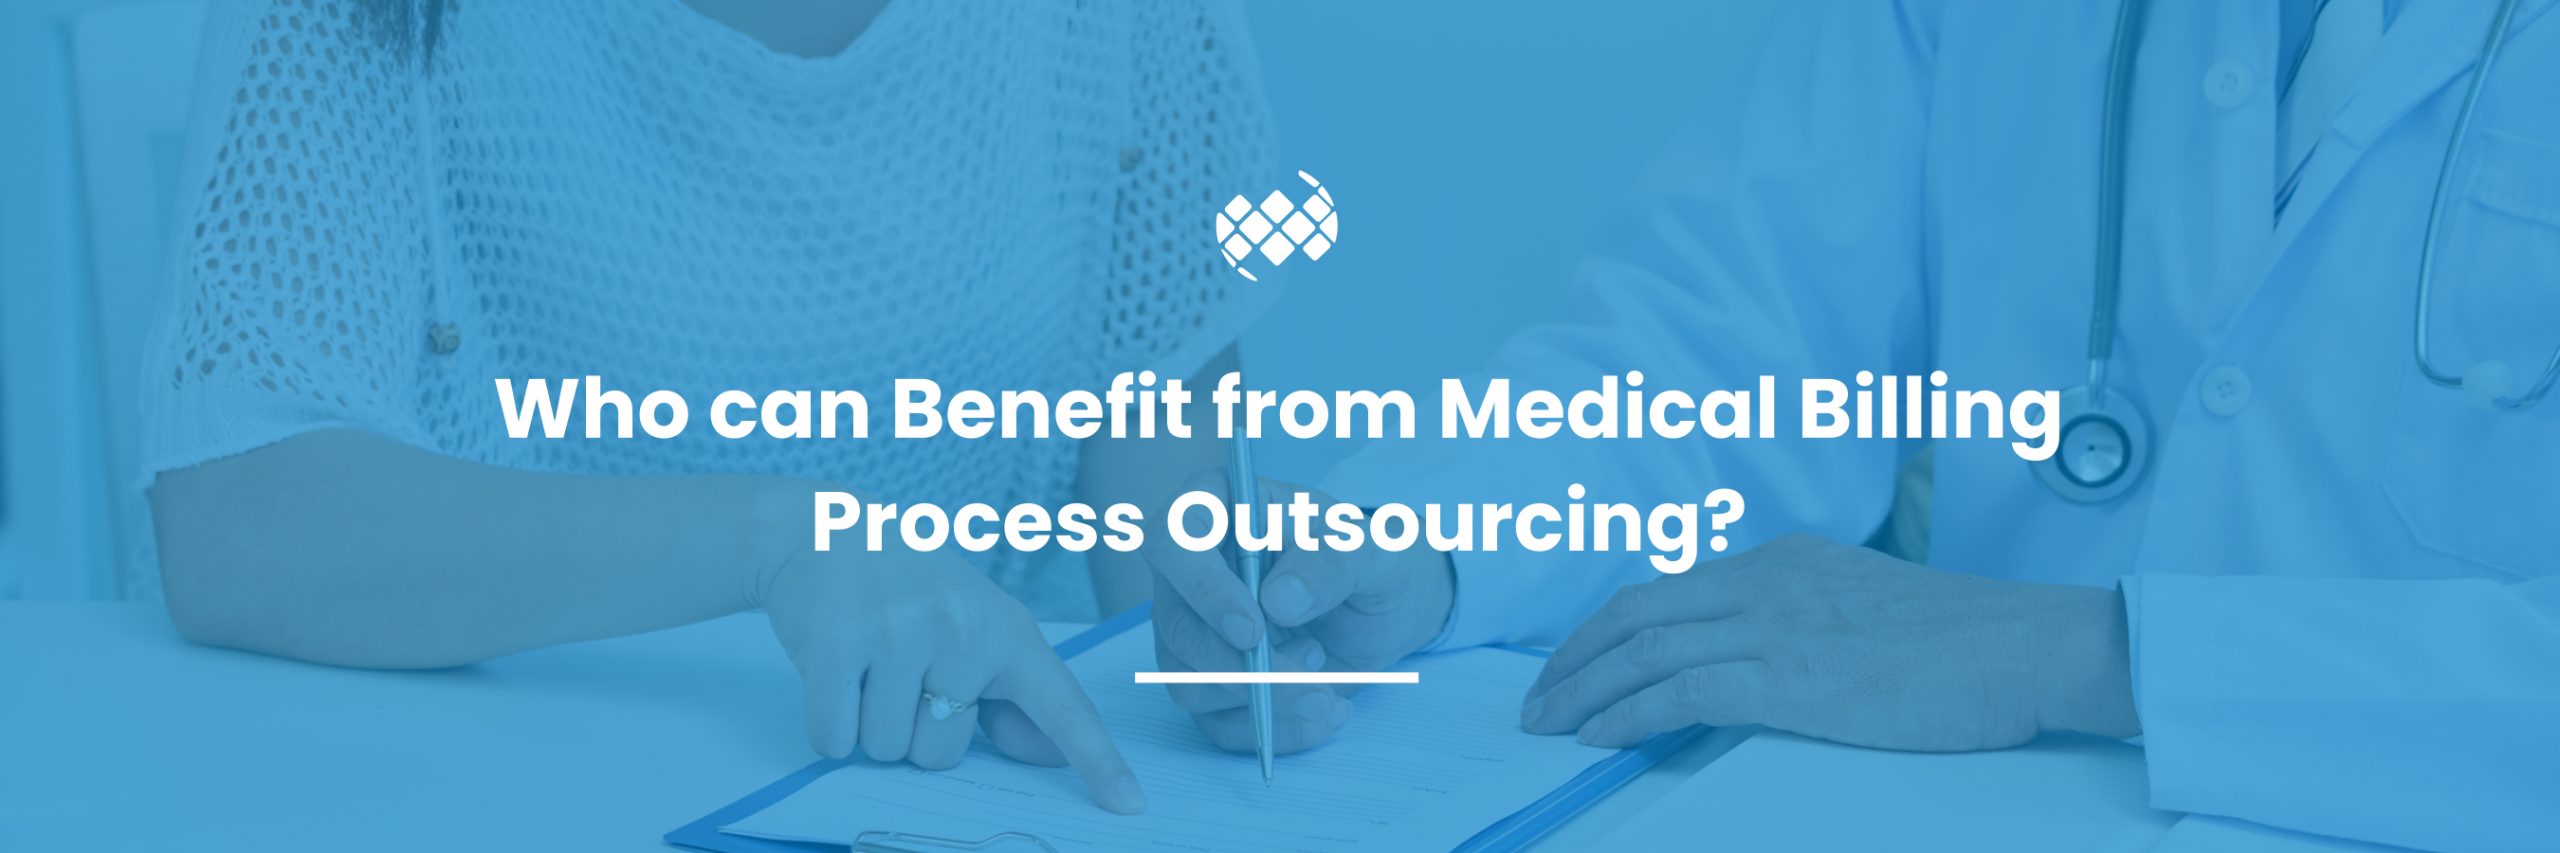 medical billing process outsourcing